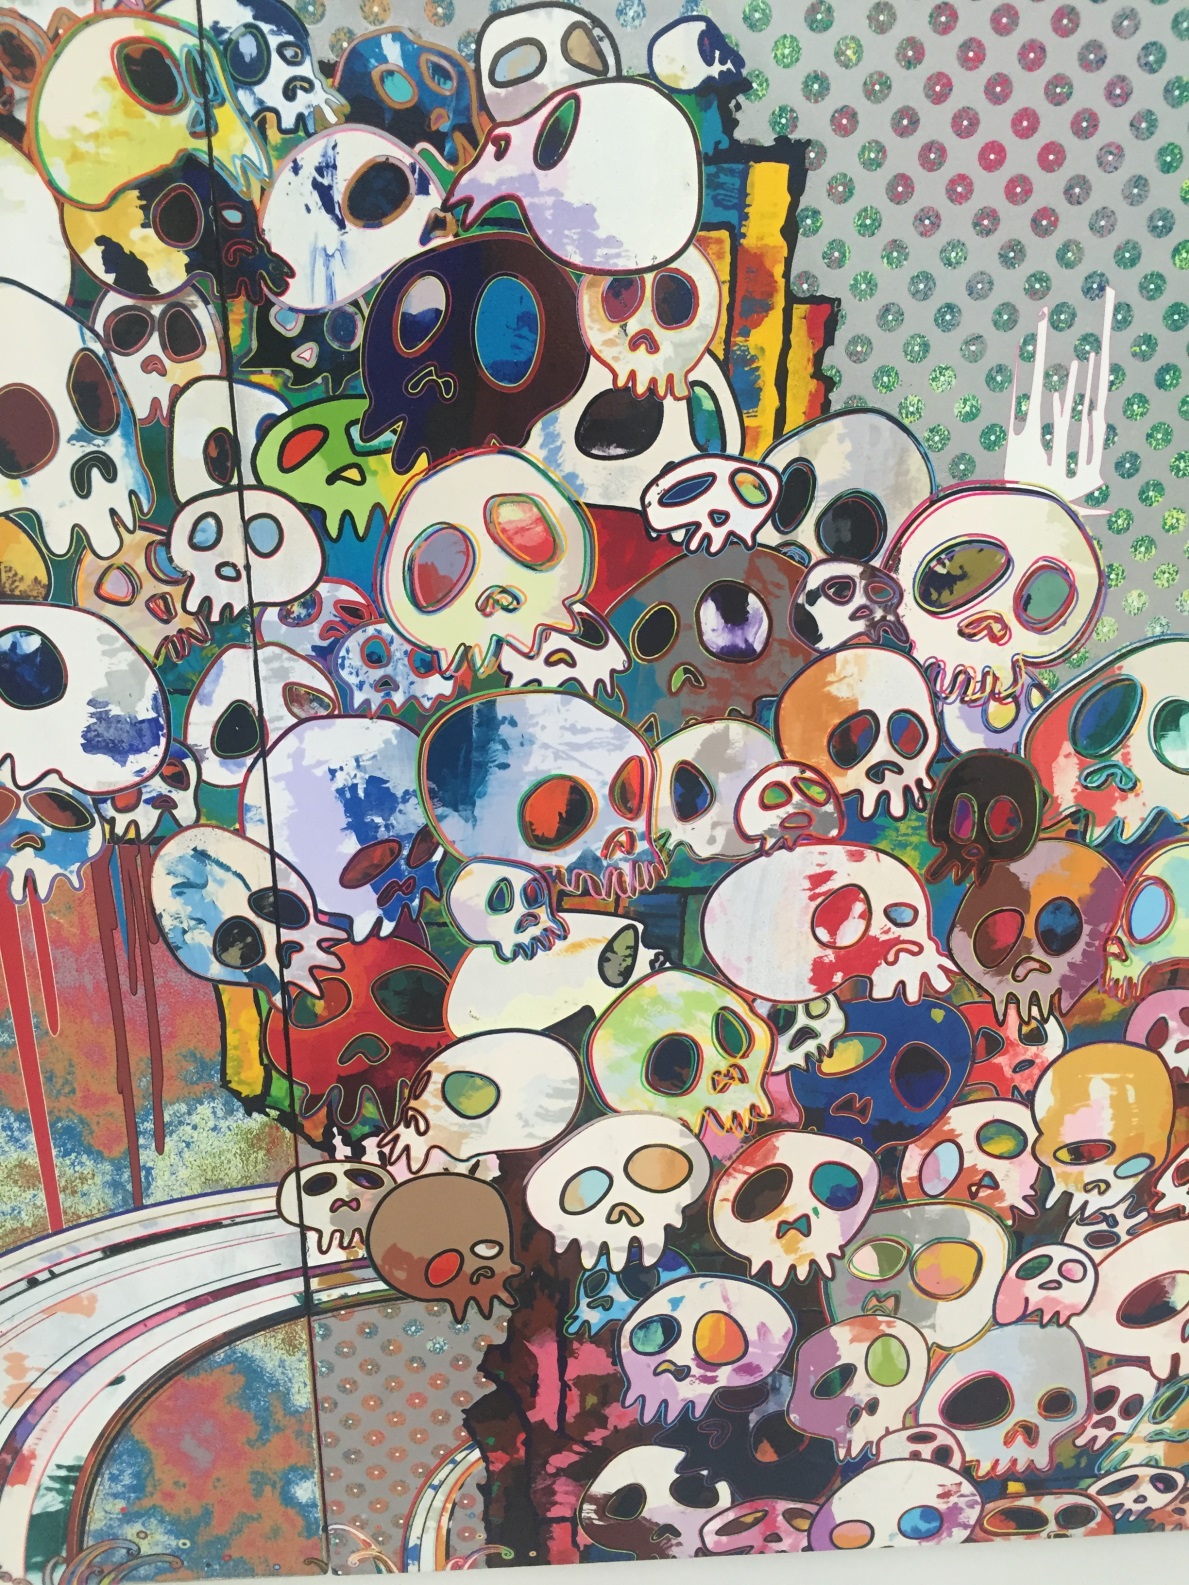 Figure 1: Takashi Murakami's piece shows how a unified whole comes from disparate parts.